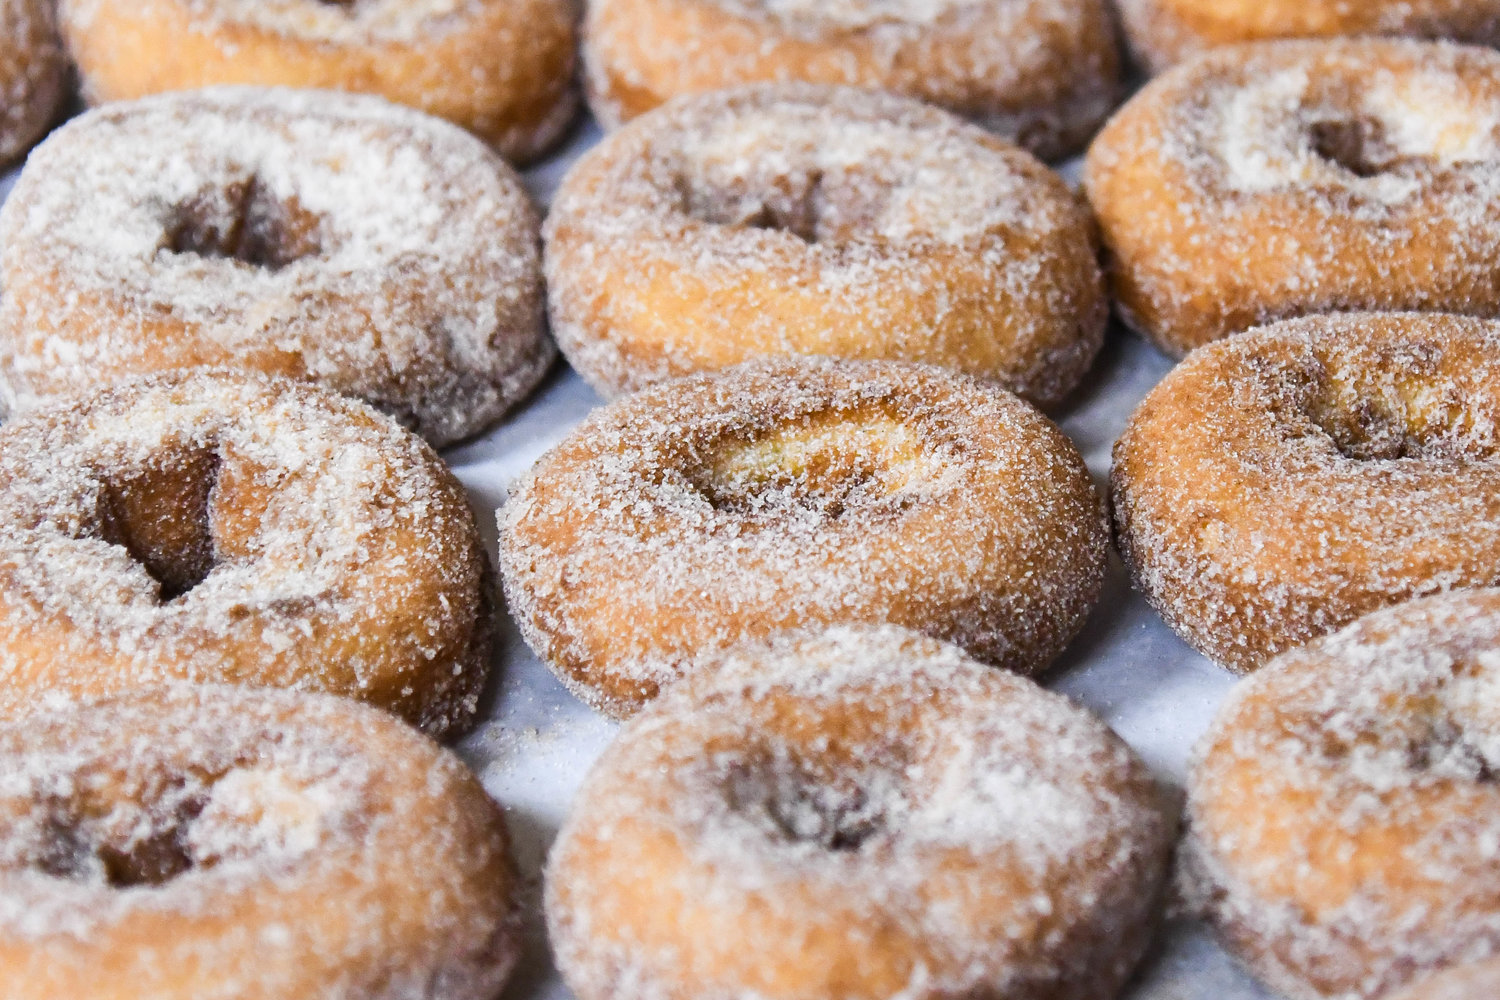 Fresh cider donuts are prepared in the kitchen at Clinton Cider Mill on Friday.